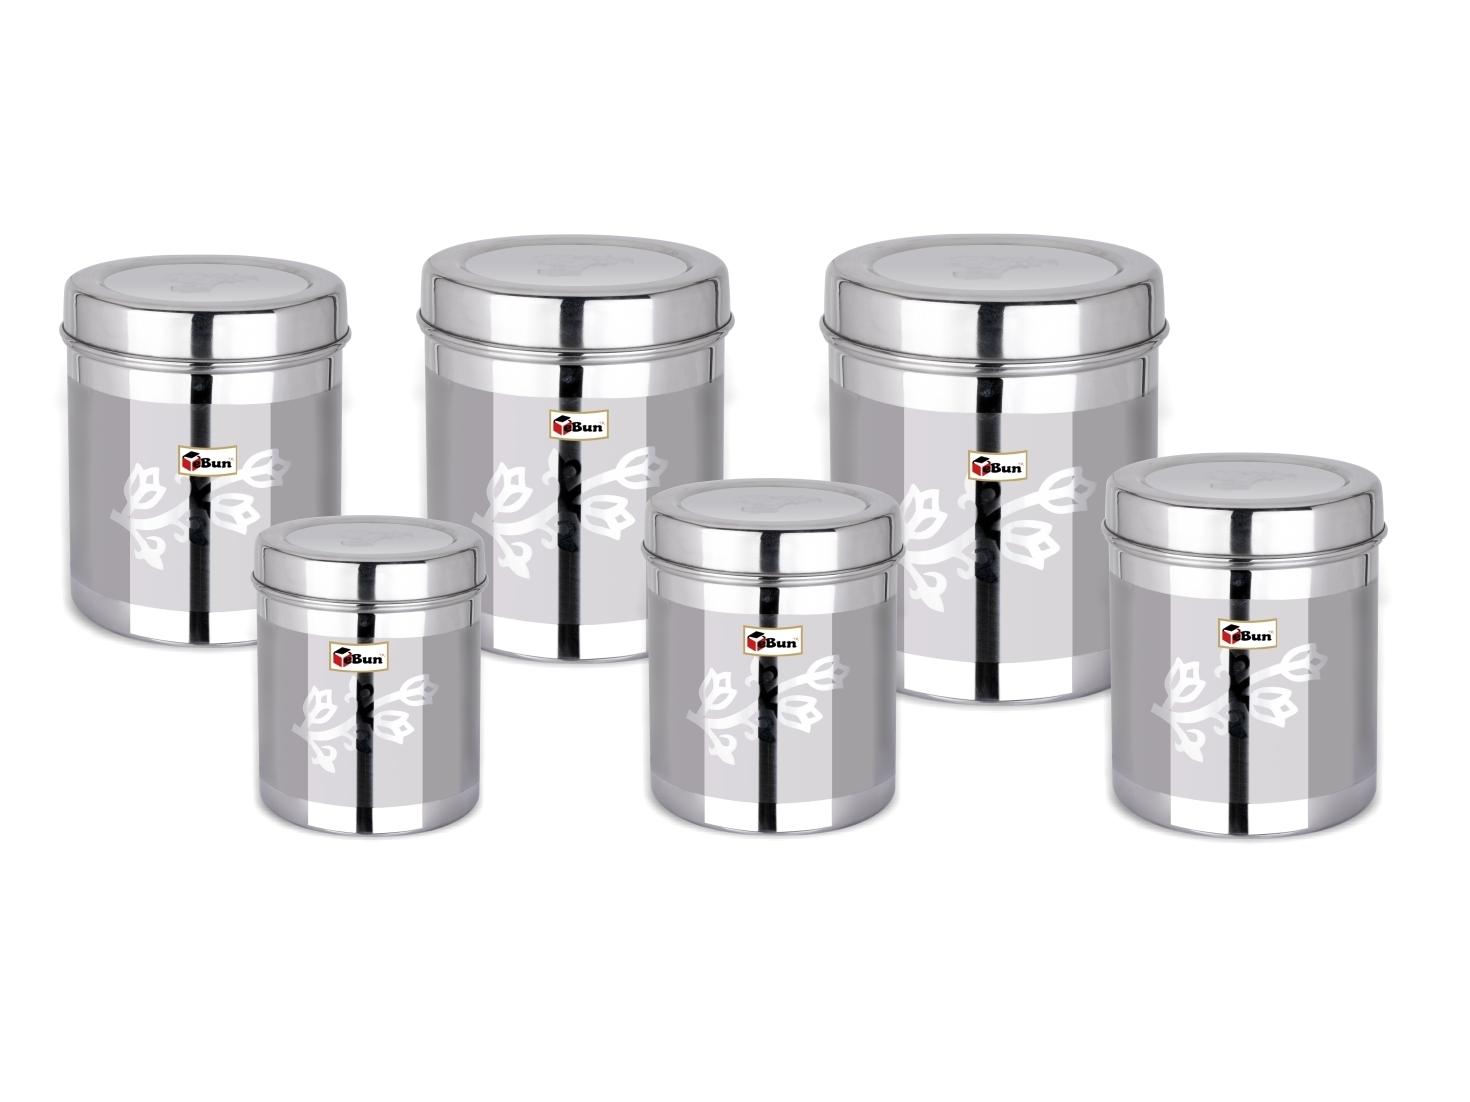 EBun Stainless Steel Laser Finish Floral Dabba Containers Set with ...